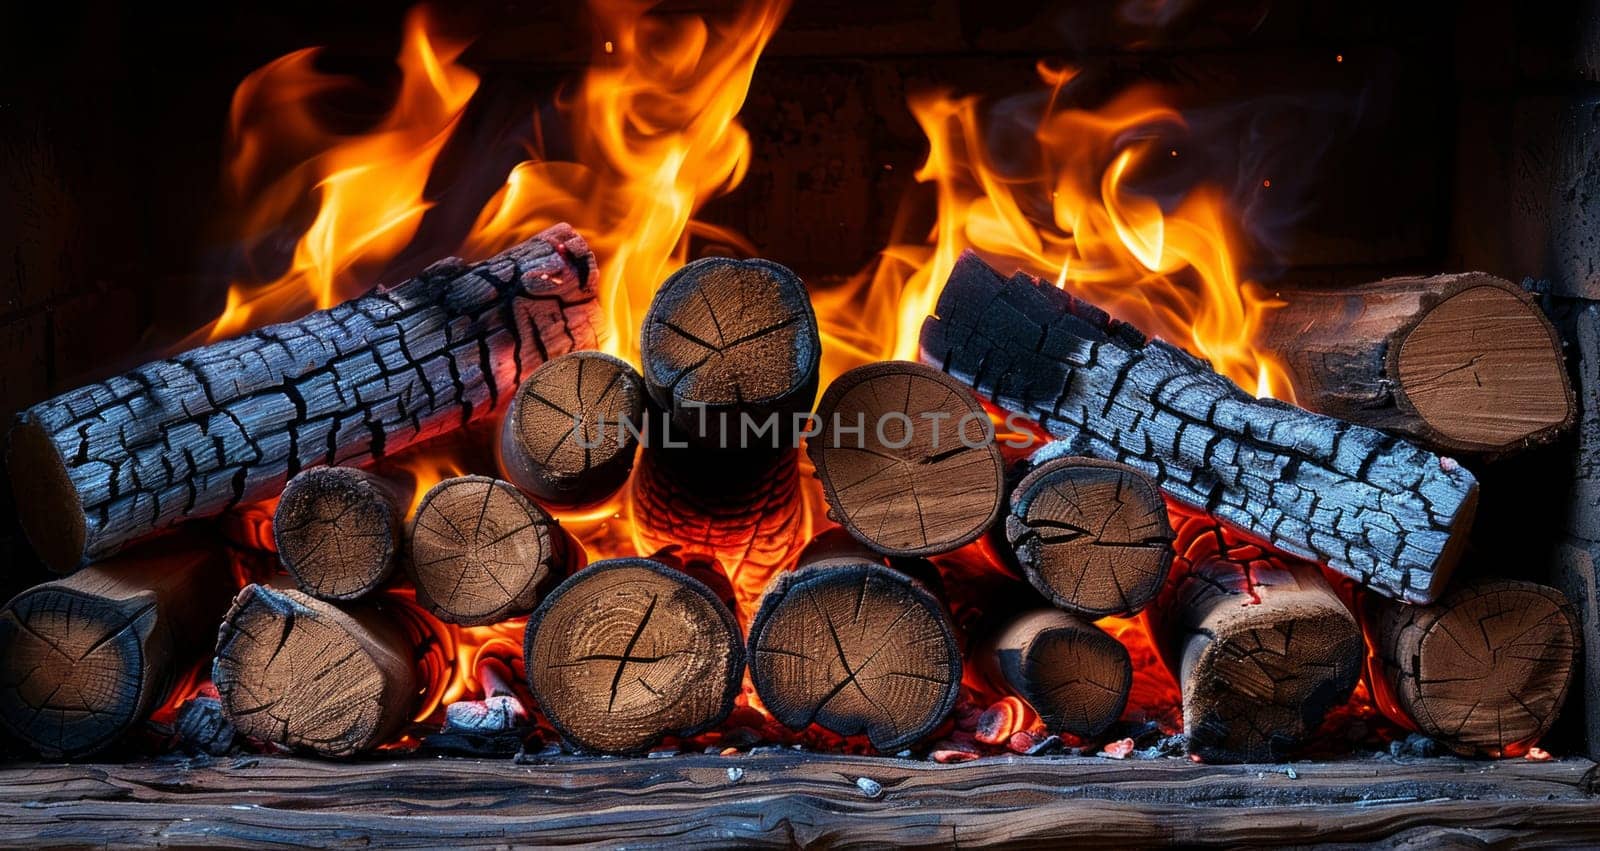 The firewood is burning.